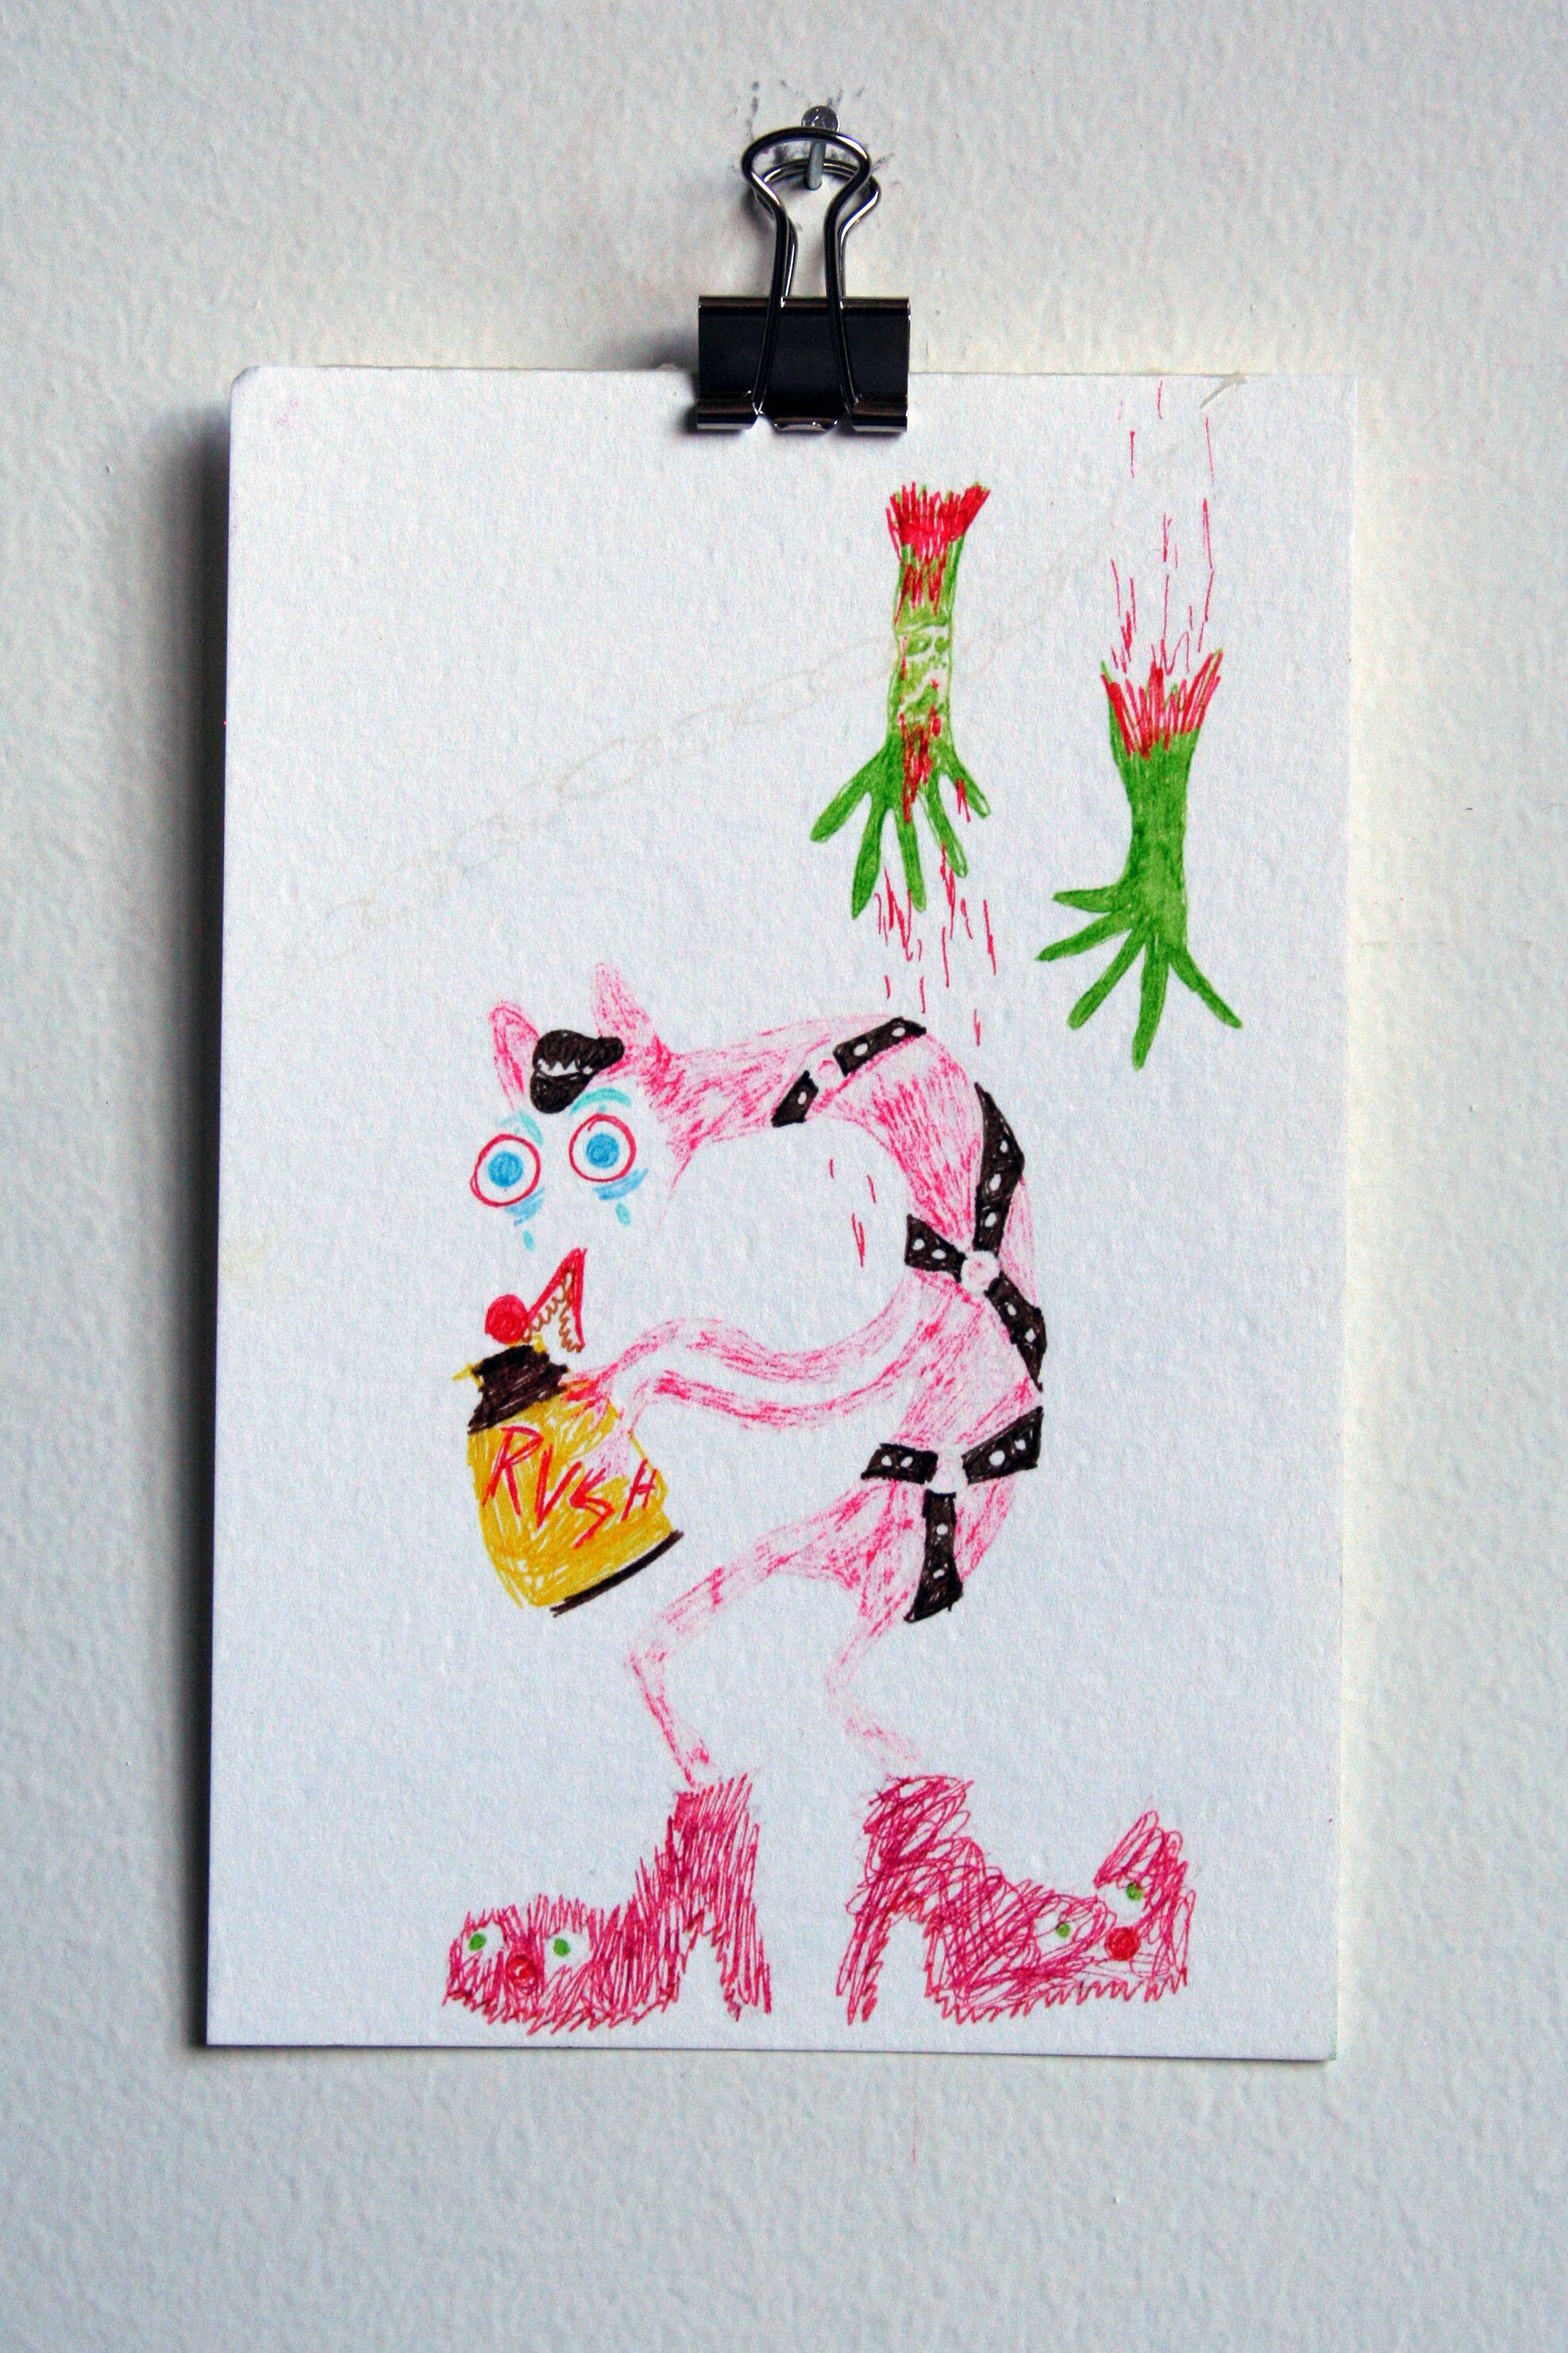   Pleather Puppy and Poppers Puppet,   2015  6 x 4 inches (15.24 x 10.16 cm.)  Marker on paper 